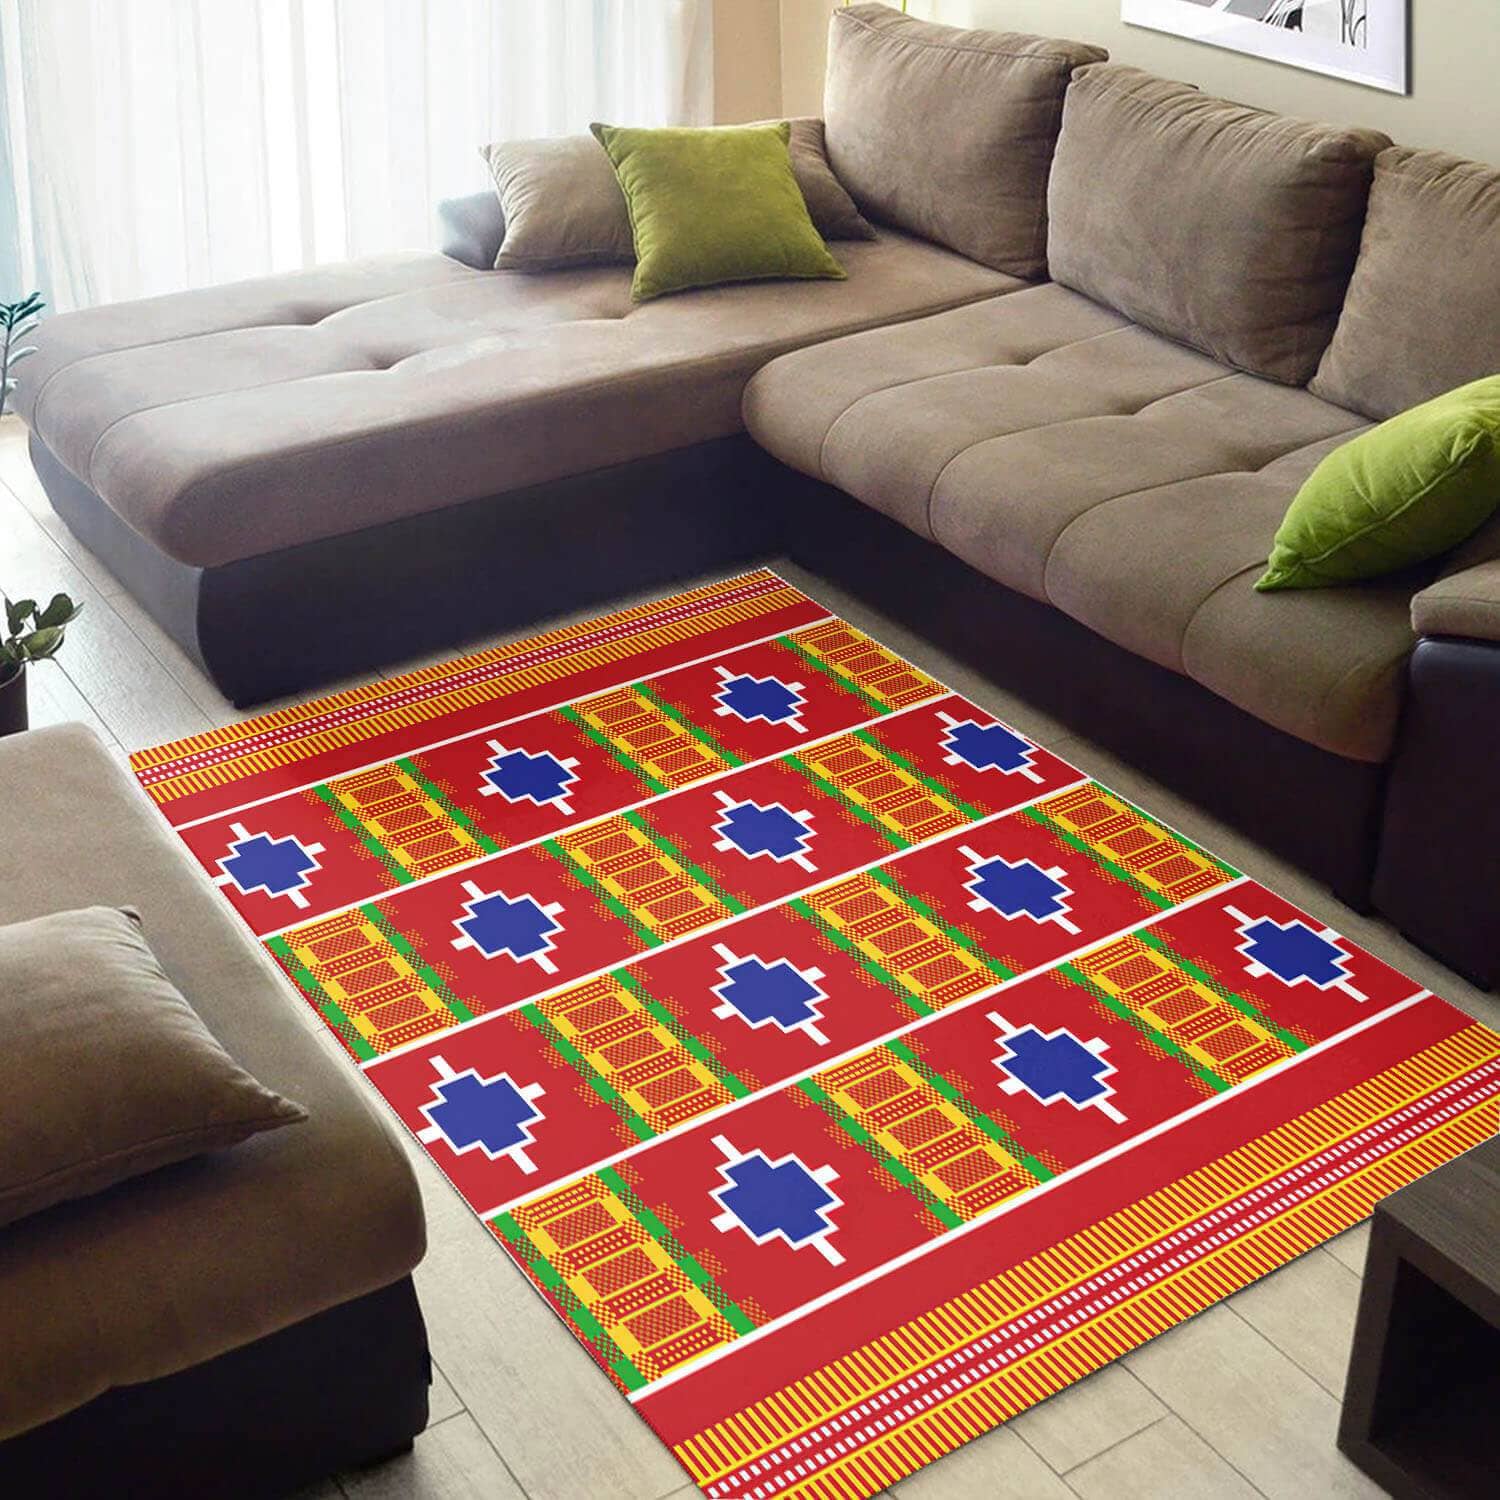 Trendy African Cool Natural Hair Afrocentric Art Themed Living Room Rug